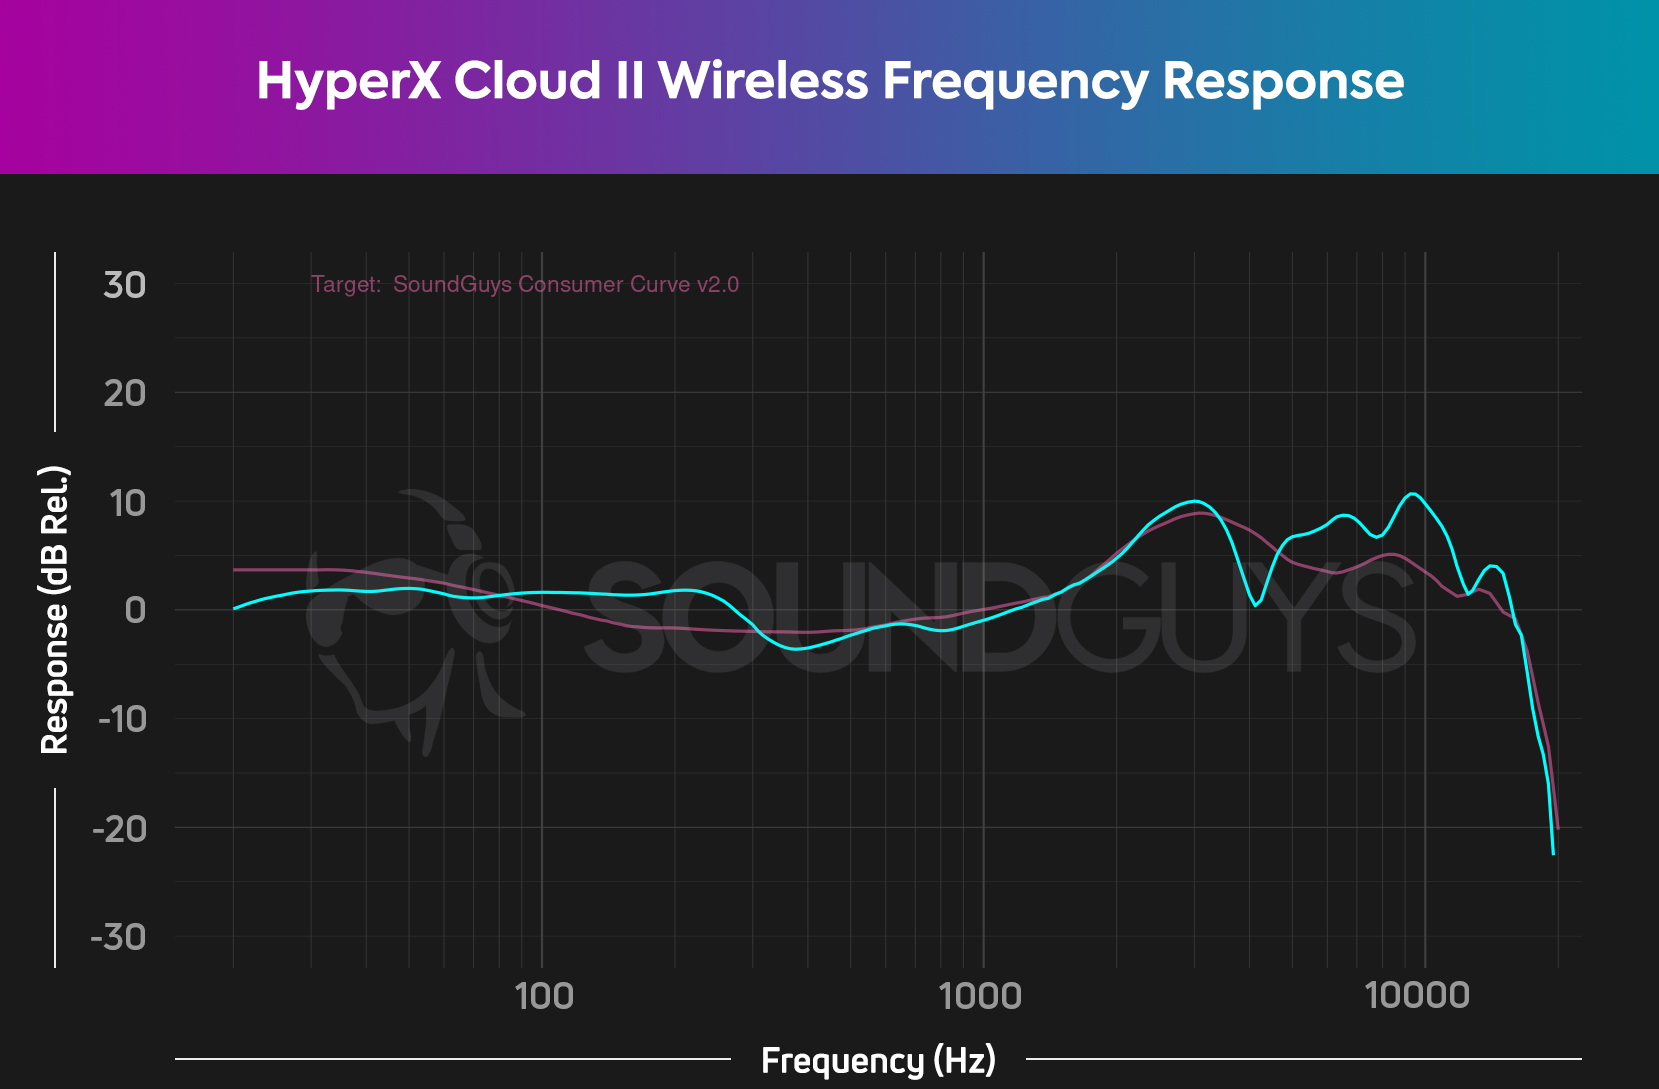 A frequency response chart for the HyperX Cloud II Wireless (cyan) against our consumer curve V2 (pink) depicts the HyperX headset's accurate bass and midrange response.